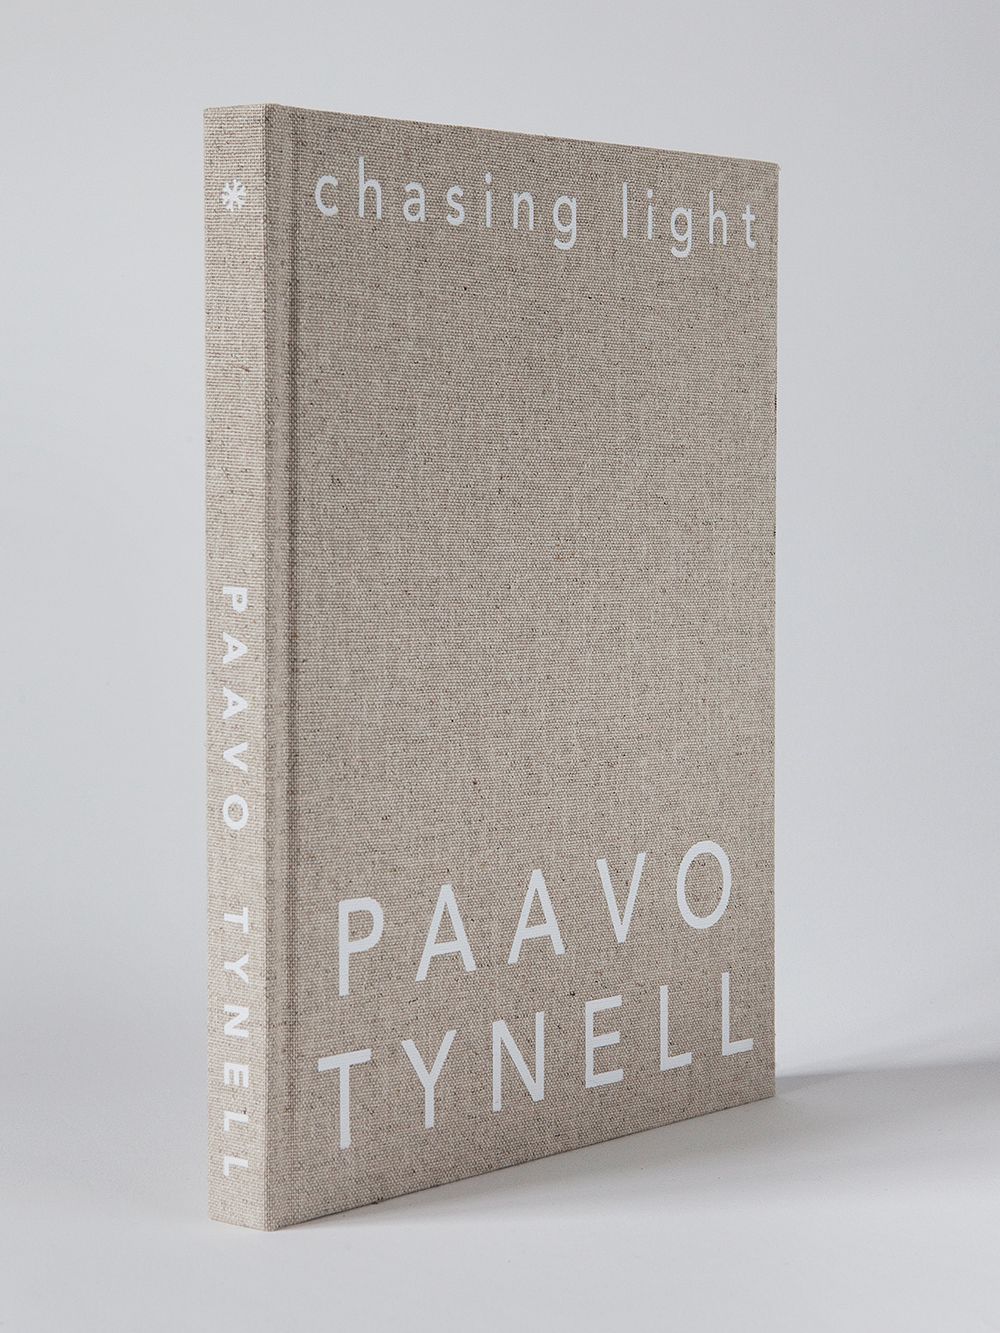 Chasing Light: The Archival Photographs and Drawings of Paavo Tynell 